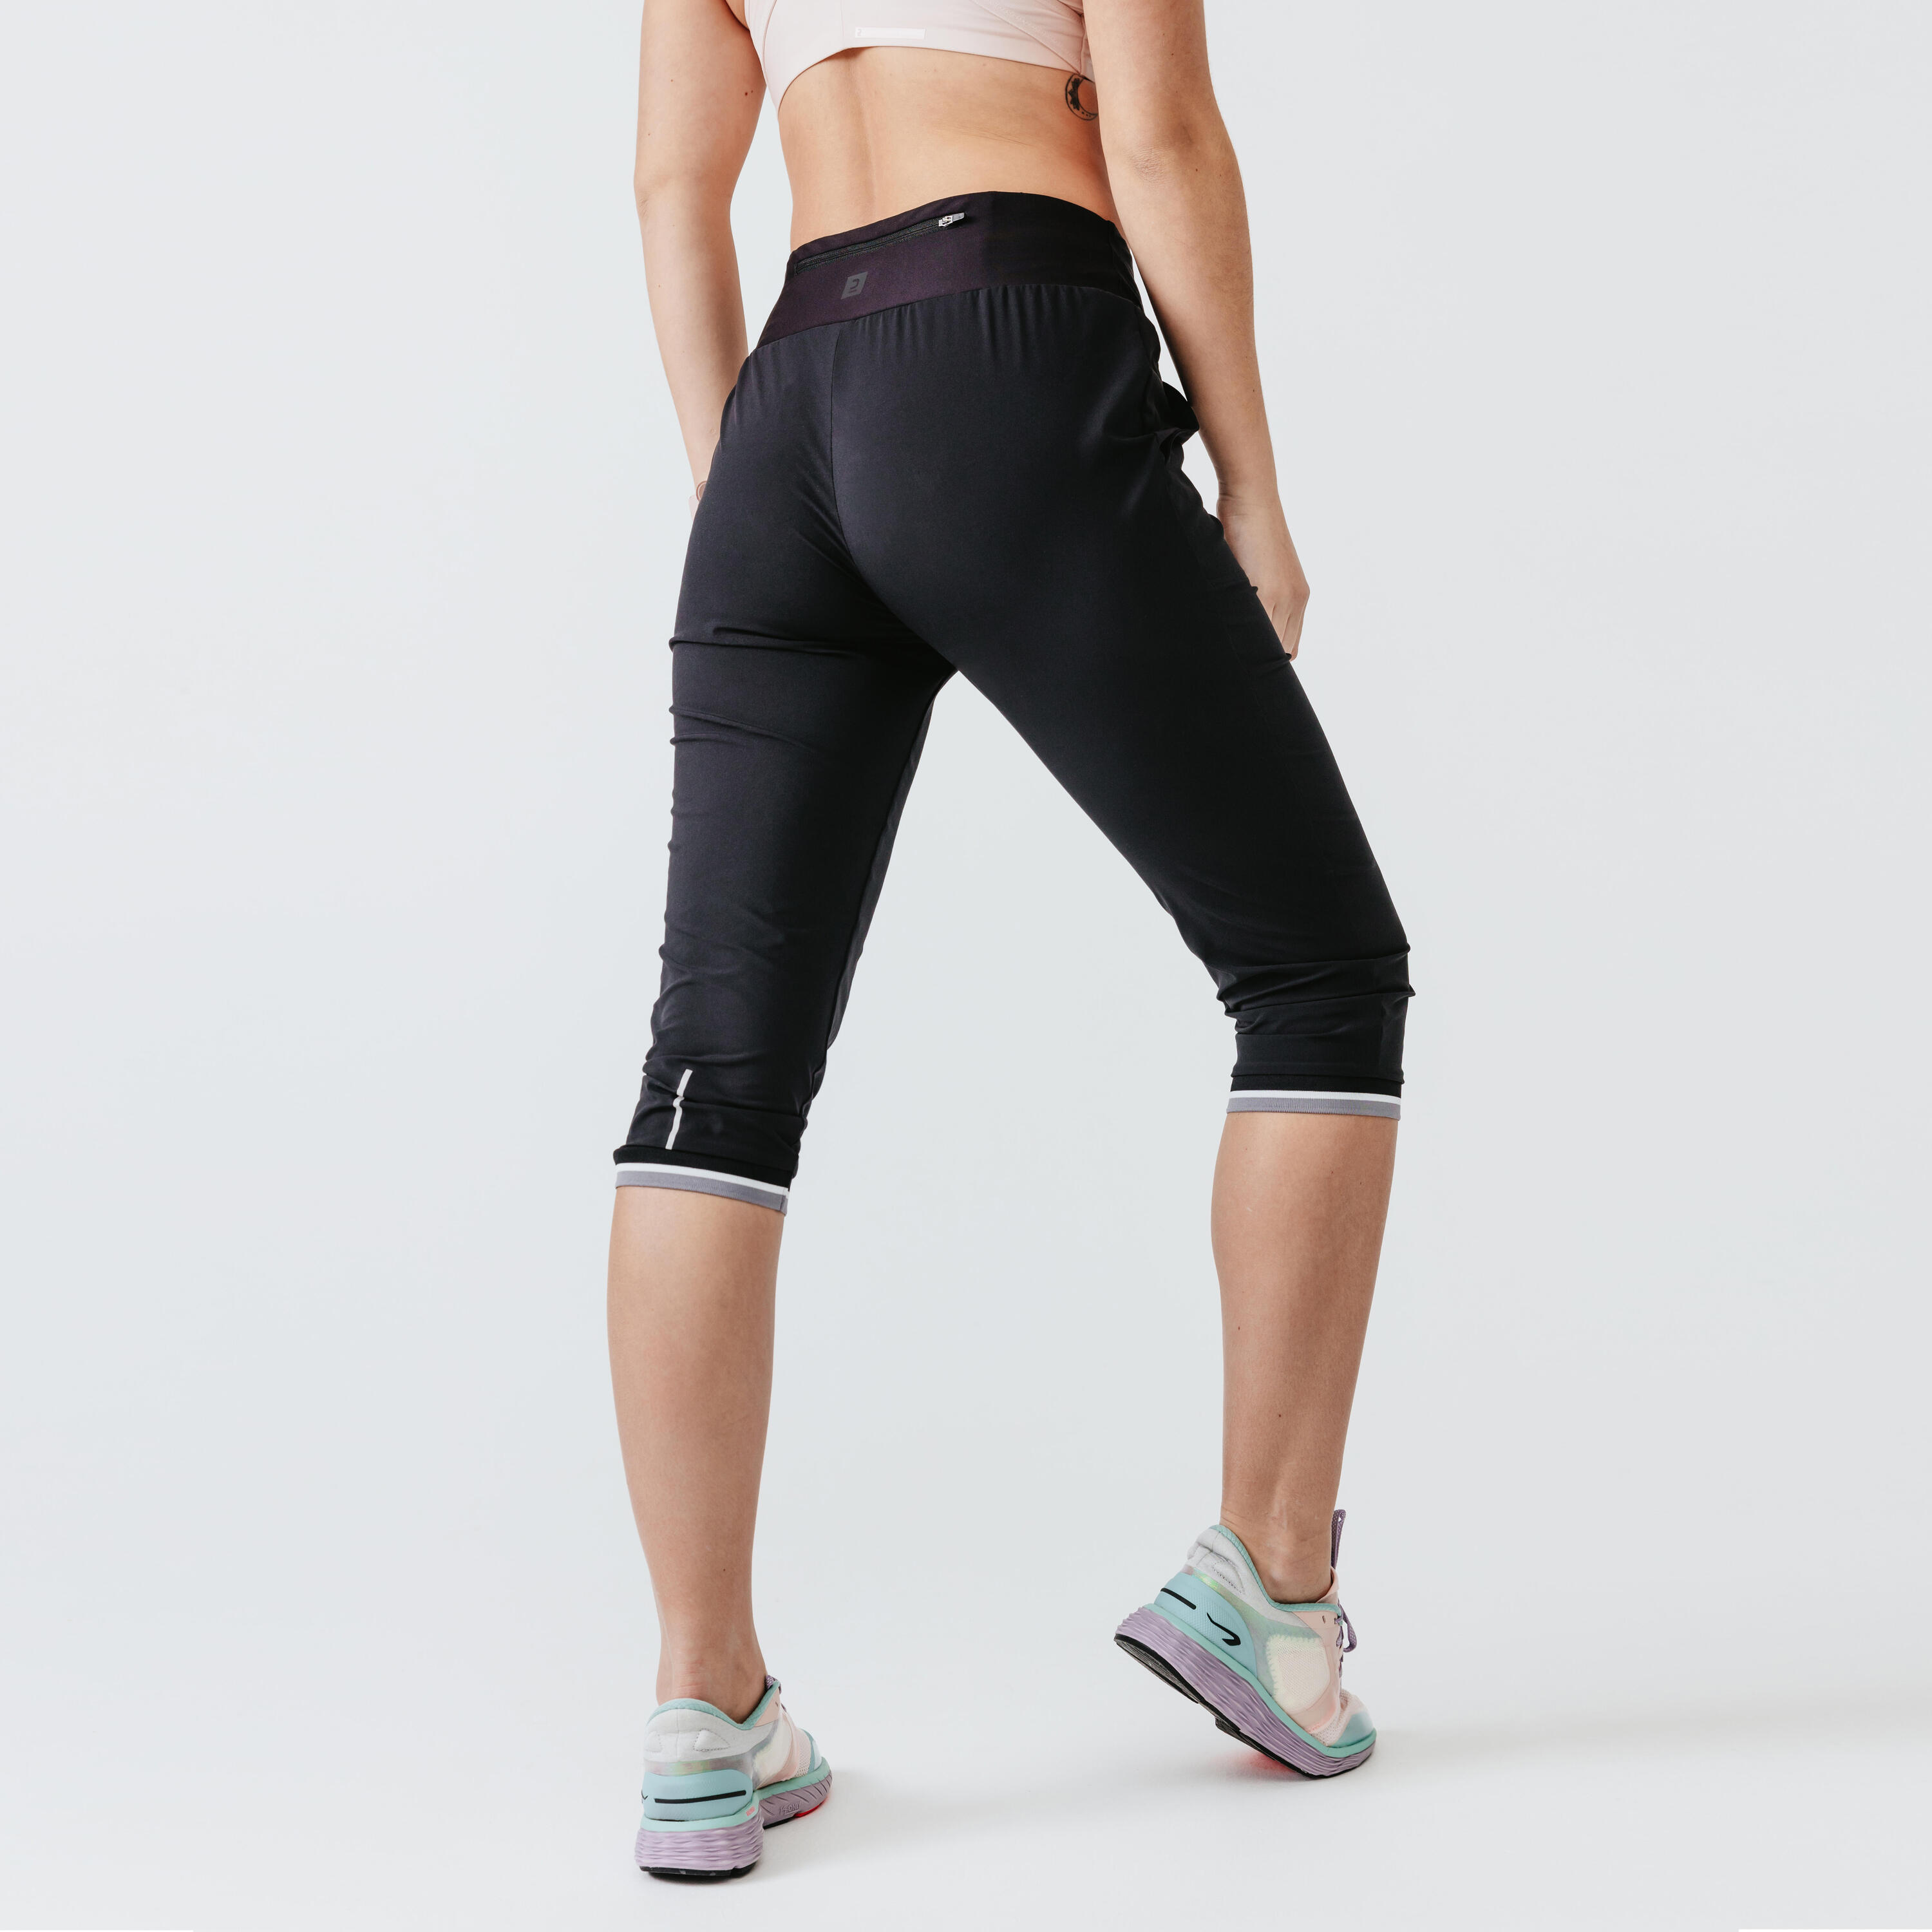 Women's cropped running trousers Dry - black 5/10